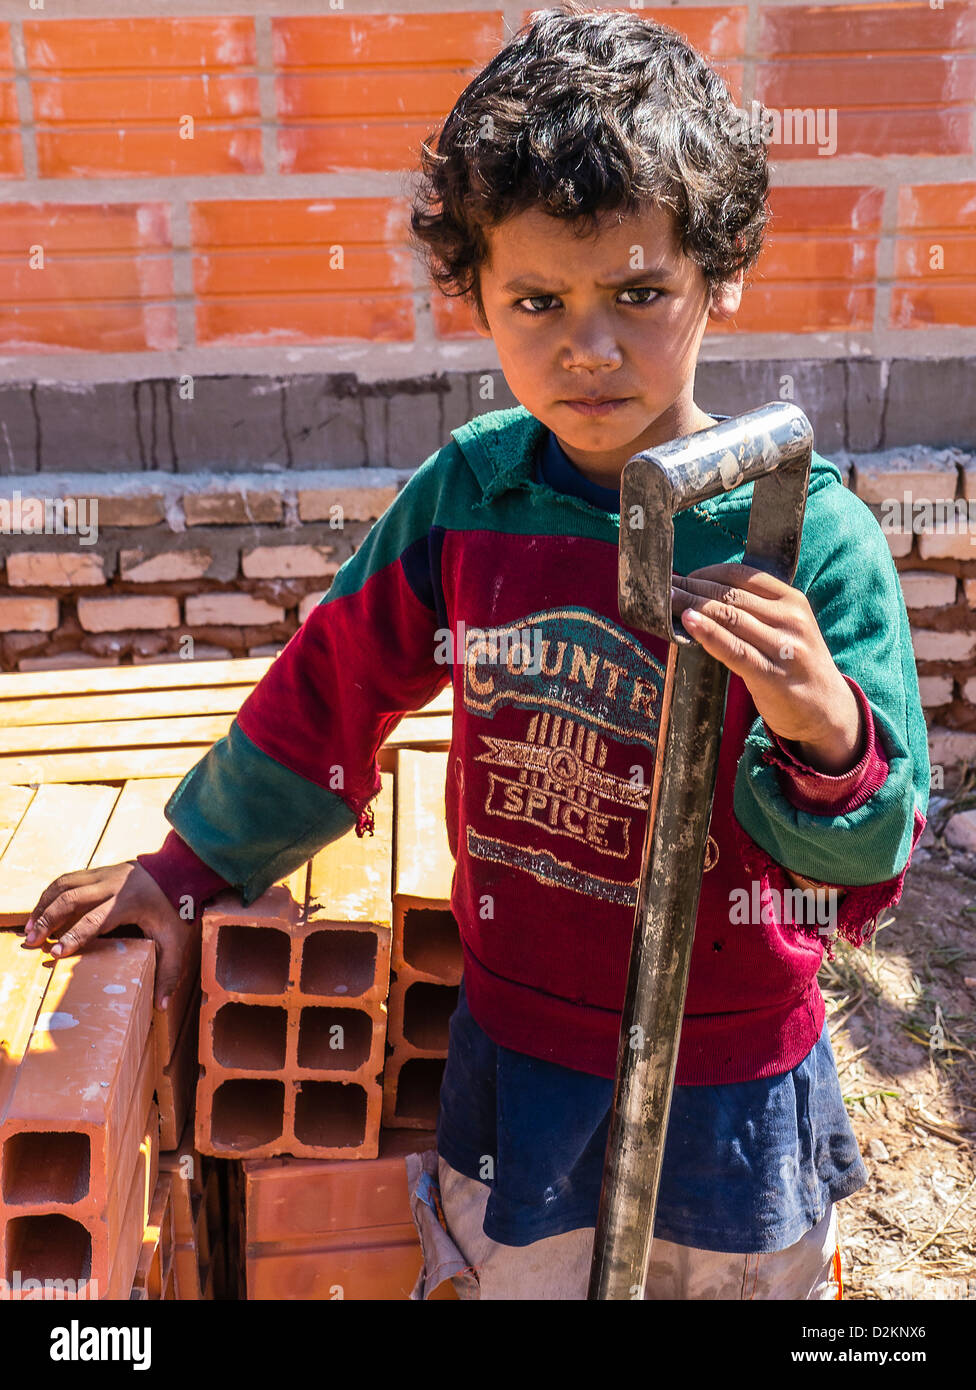 A young boy in Paraguay holding his hand on a shovel and staring intently straight ahead at a Habitat for Humanity building site Stock Photo